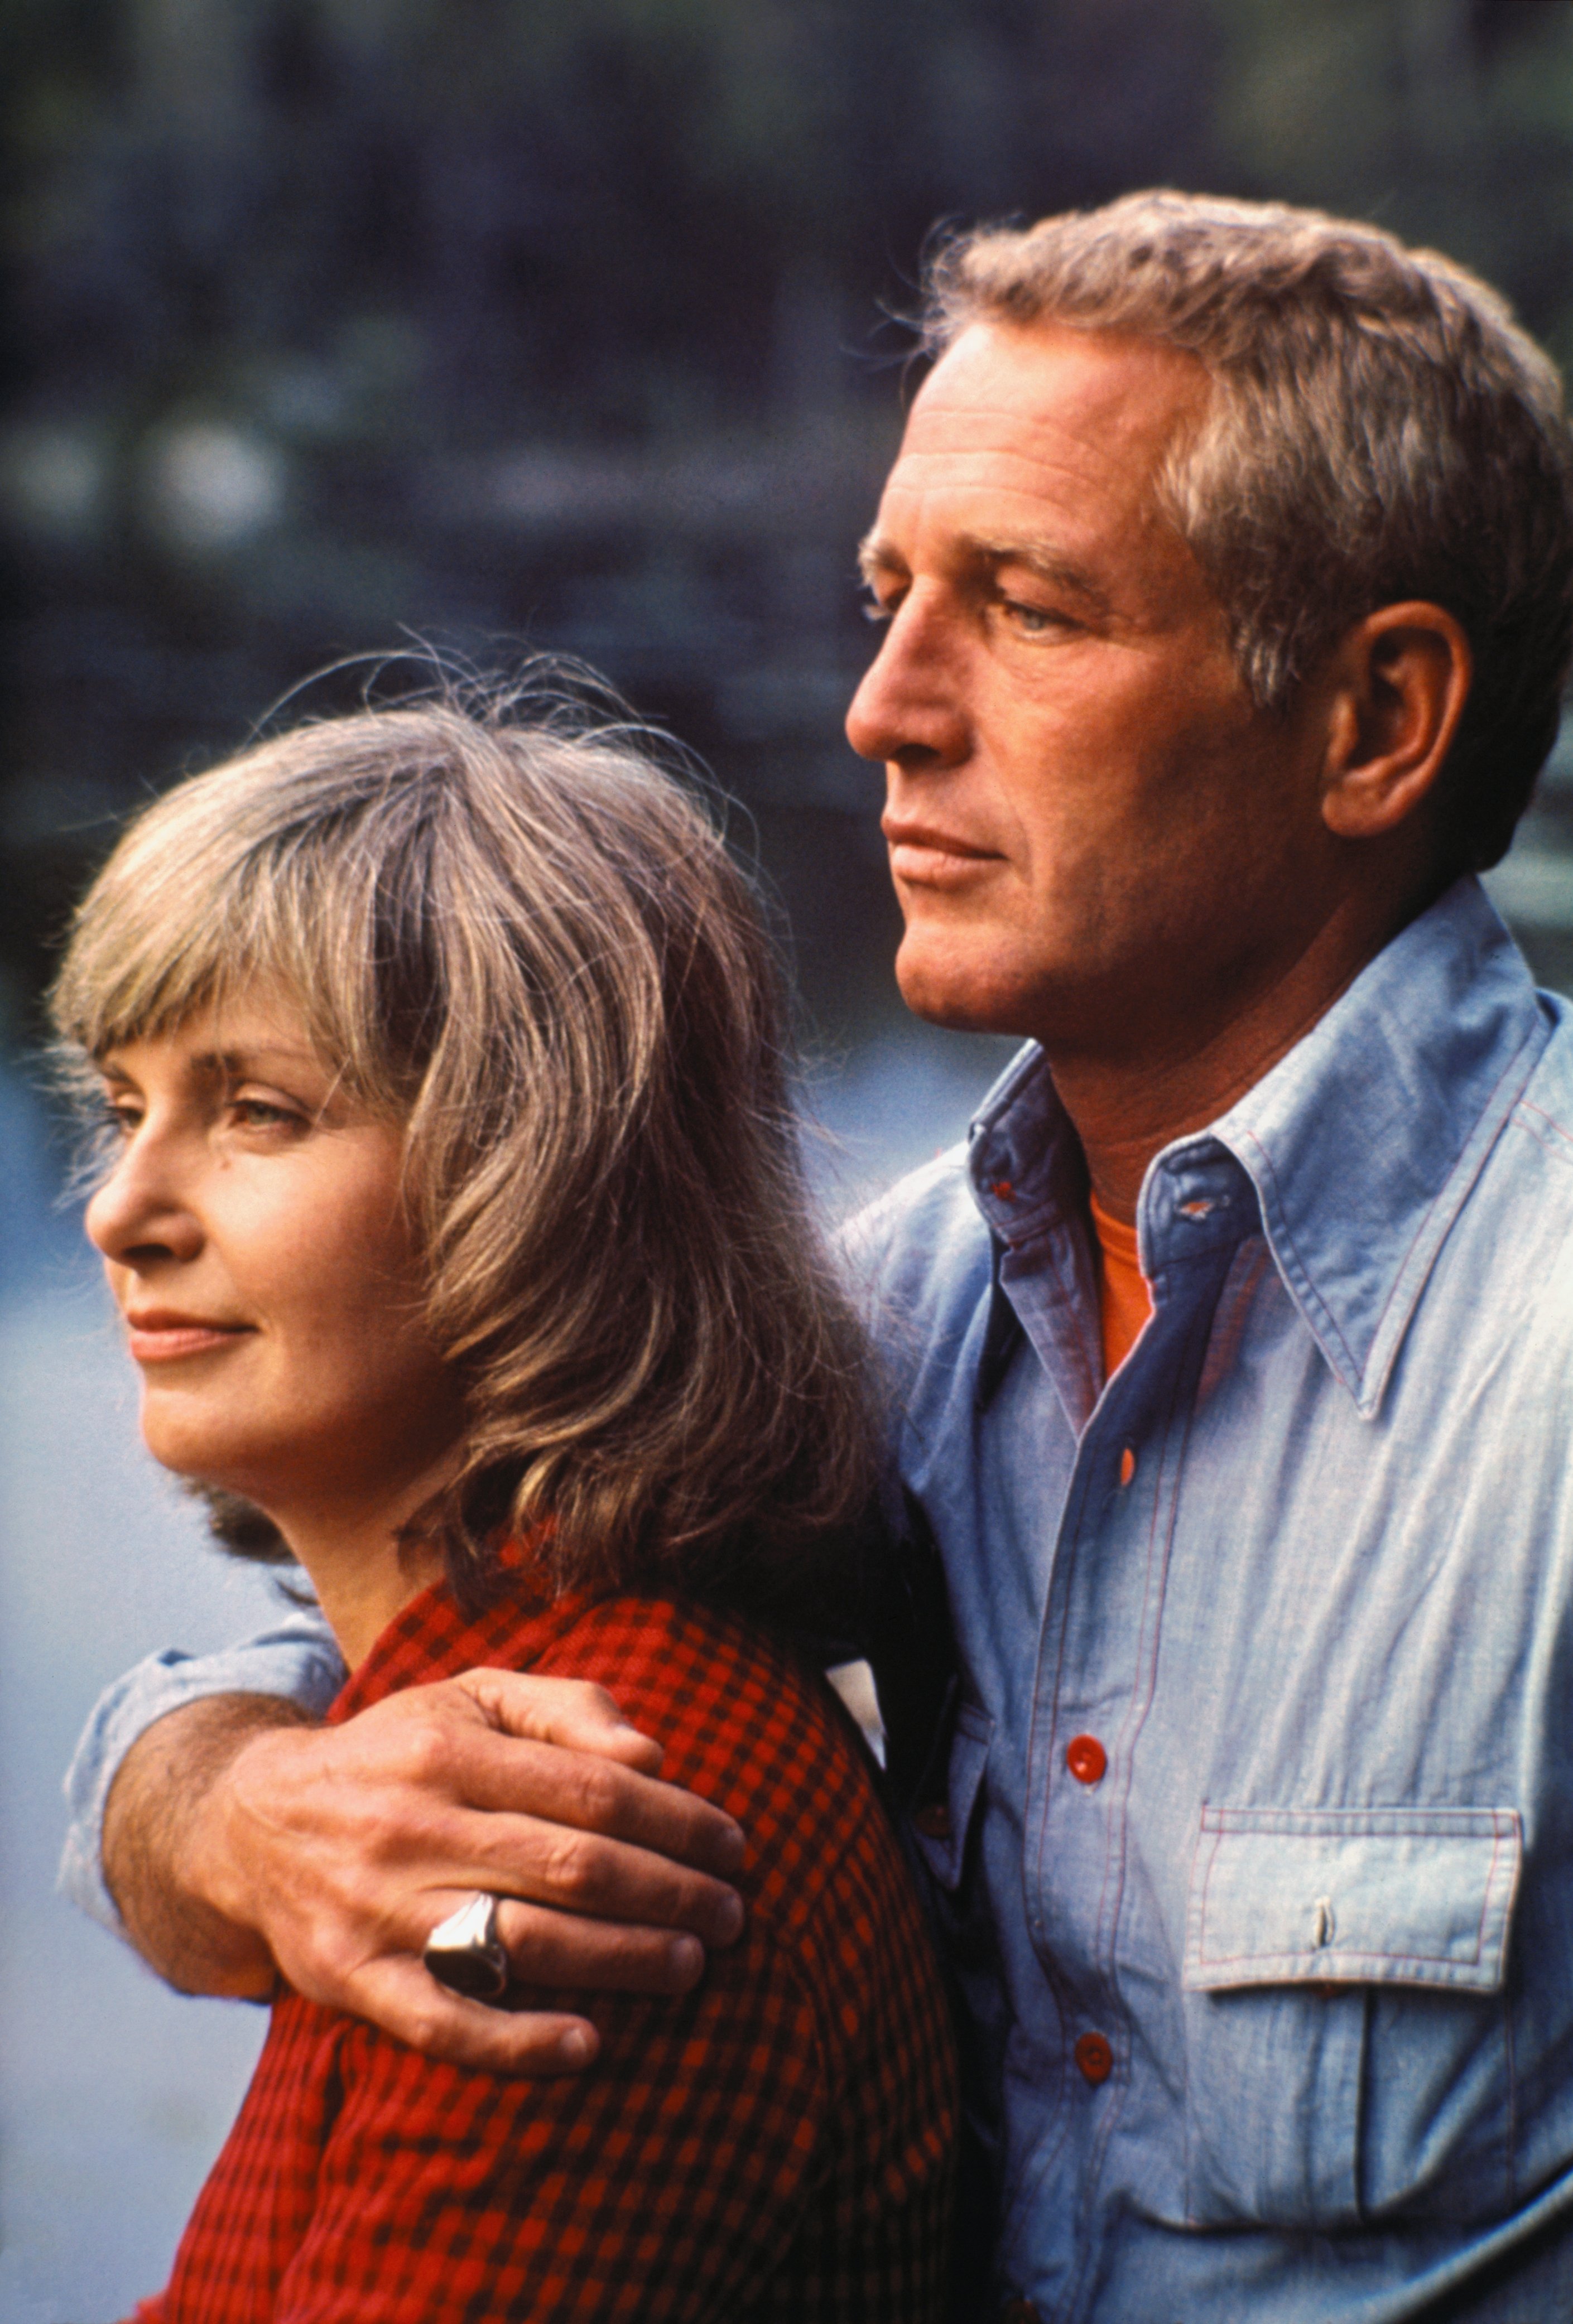 Paul Newman and his wife, actress Joanne Woodward photographed on location for a television special. / Source: Getty Images